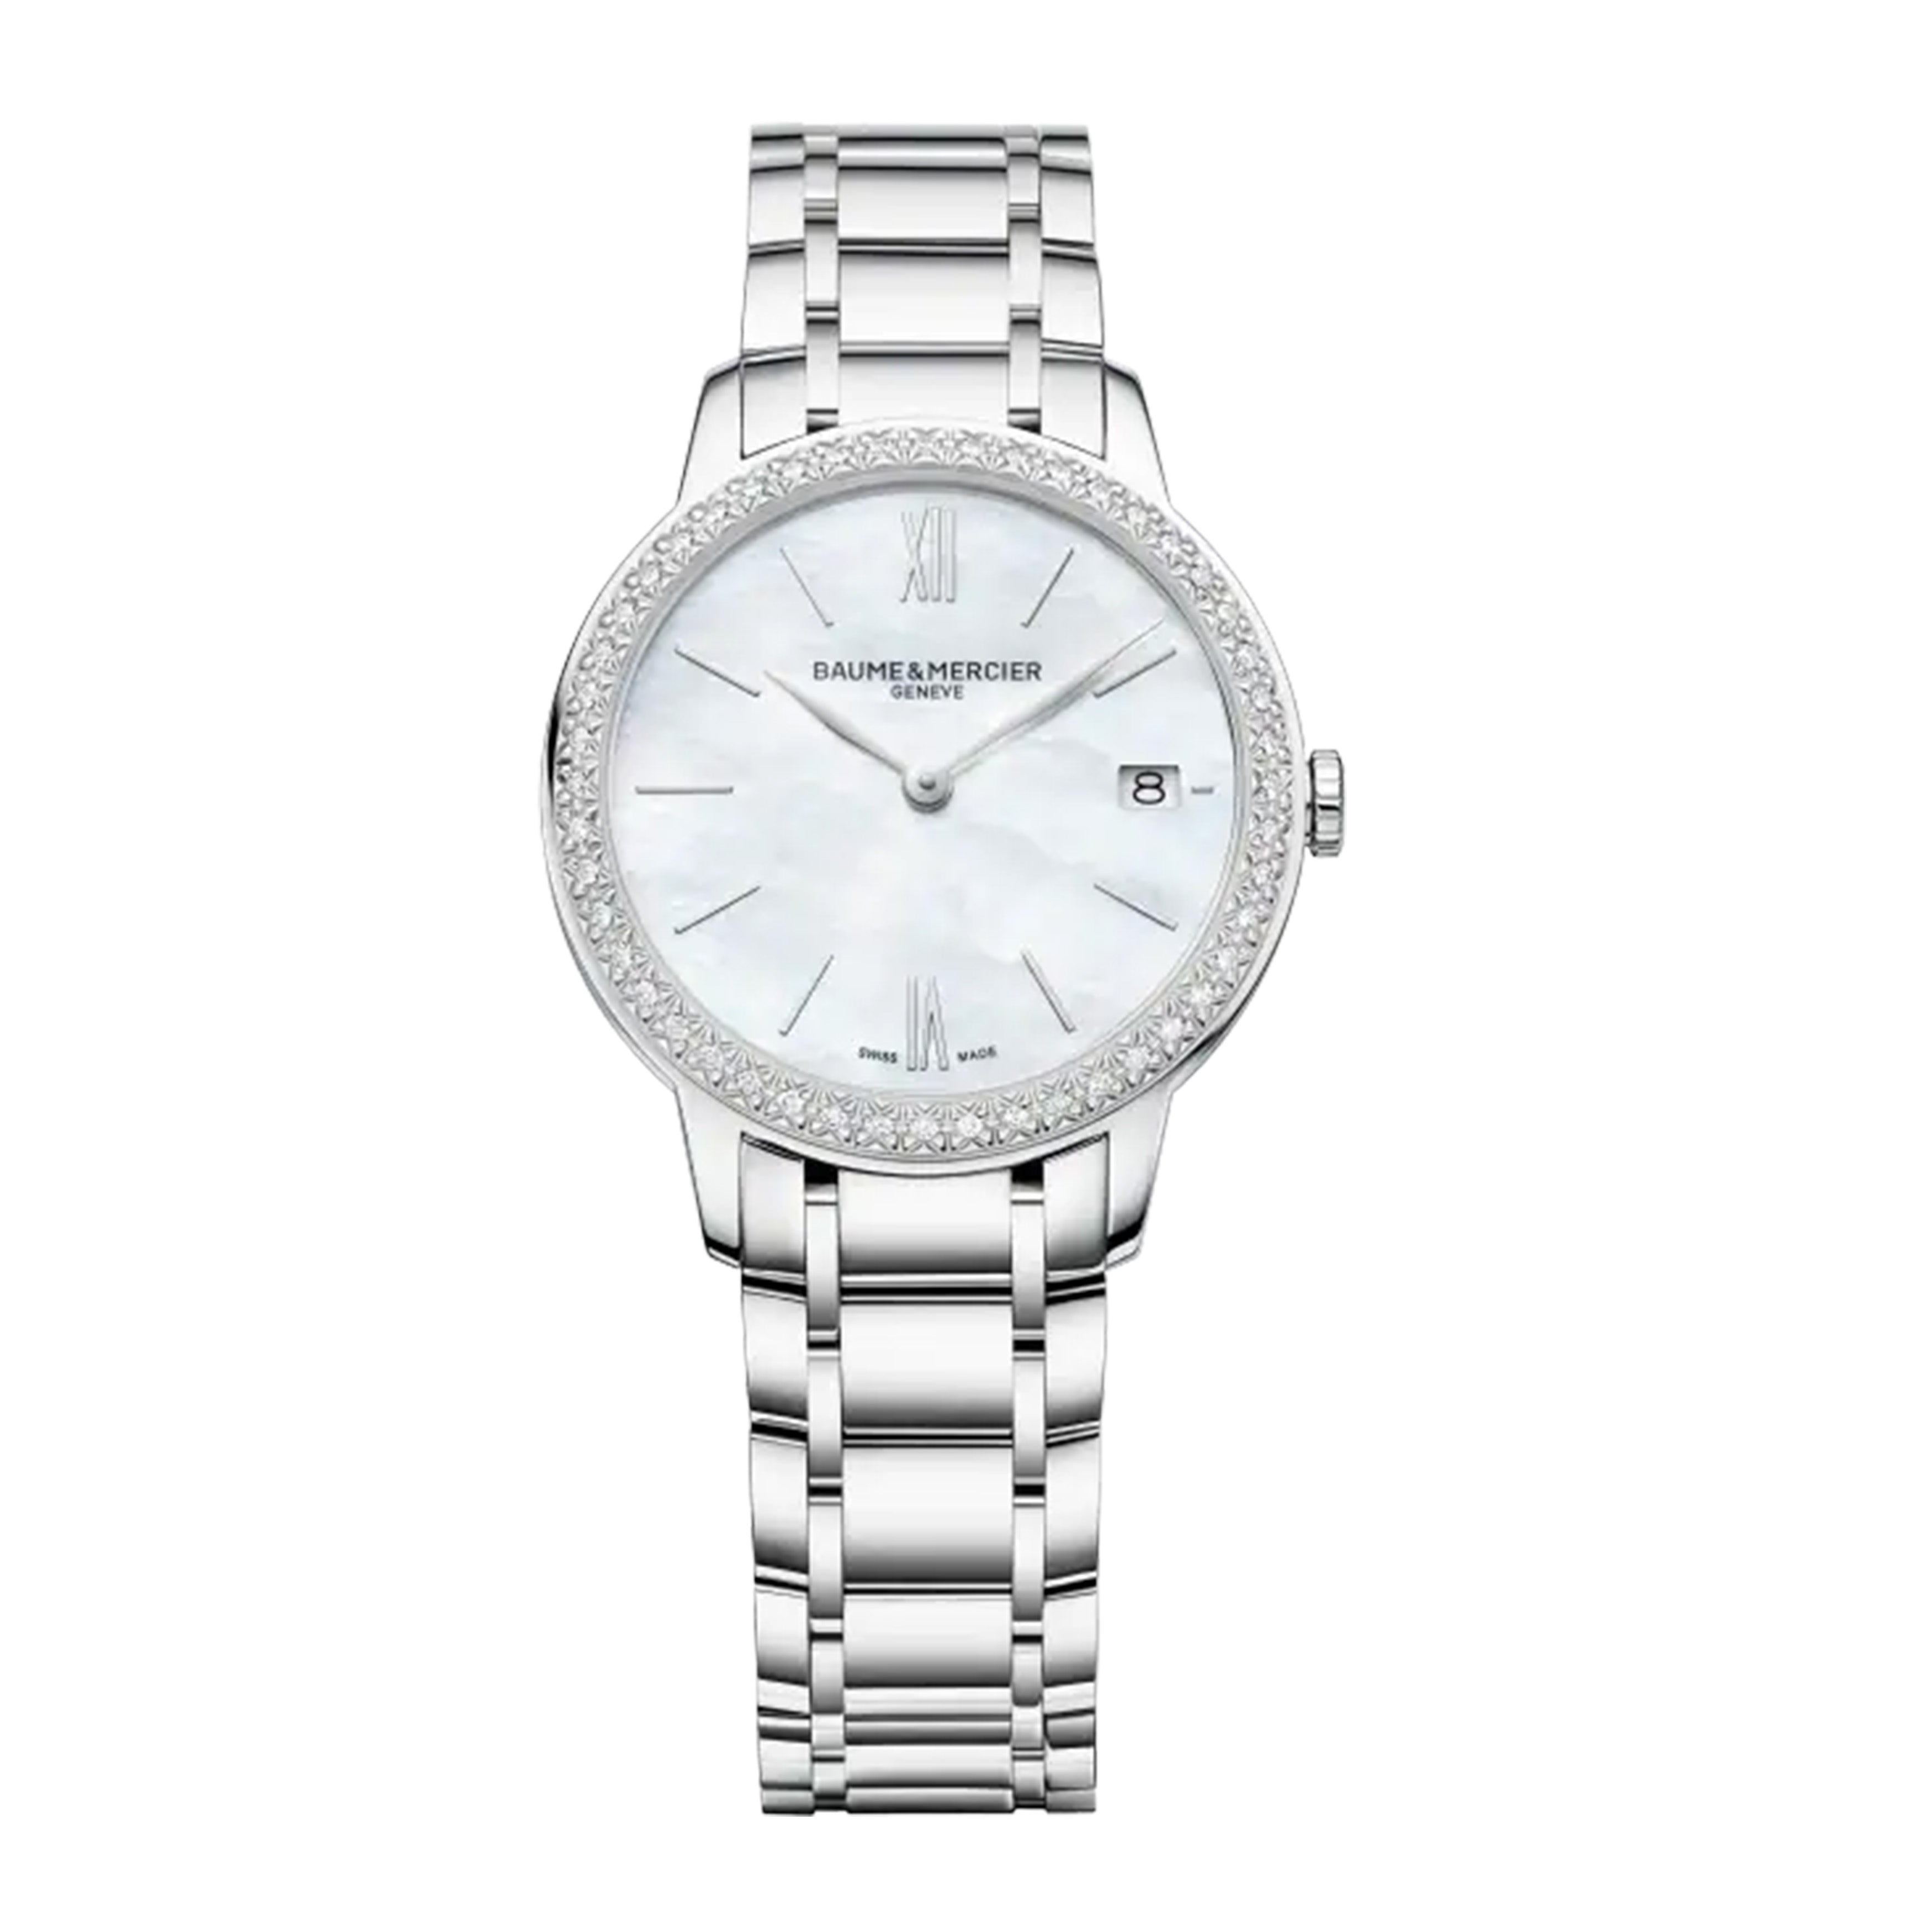 BAUME & MERCIER Classima Dimaond Set Watch, 31MM MOTHER OF PEARL DIAL, 10478